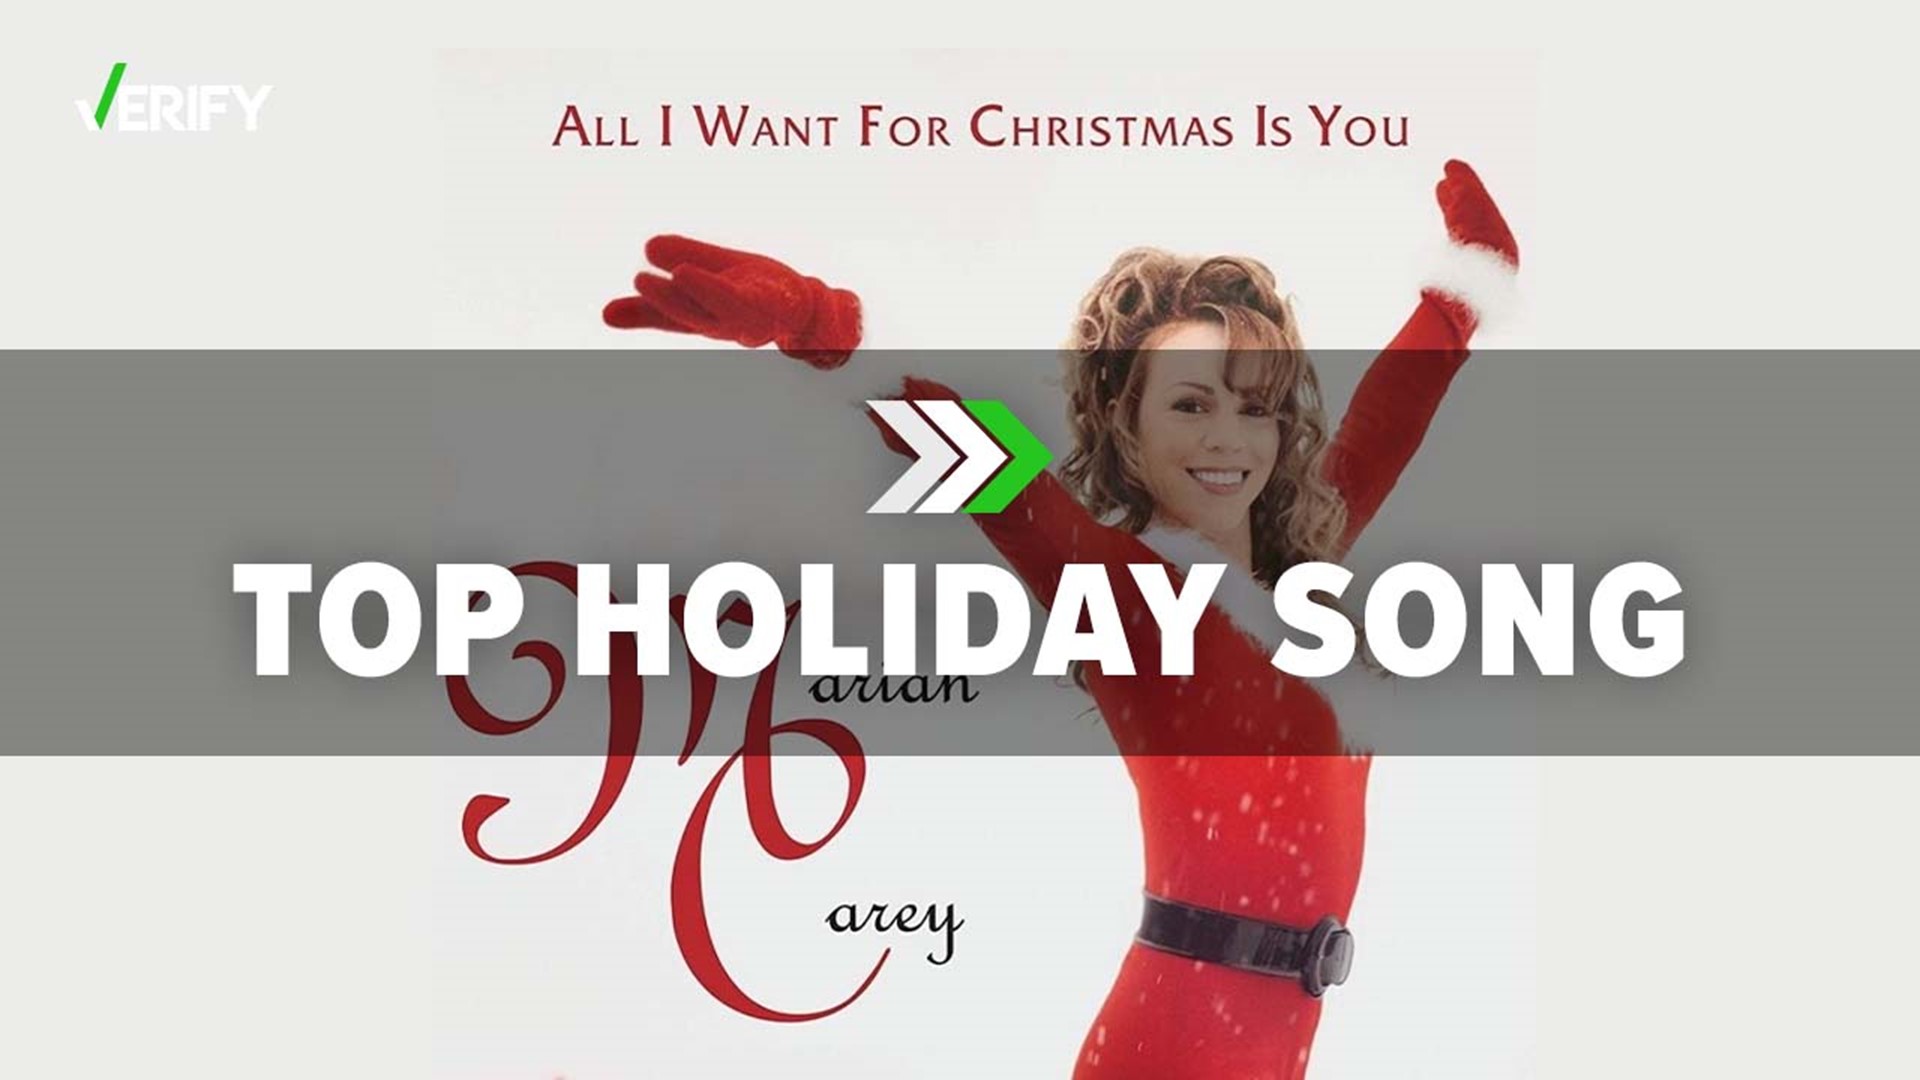 Data shows Mariah Carey’s hit holiday single, “All I Want for Christmas Is You,” garners the most streams on the holiday charts.